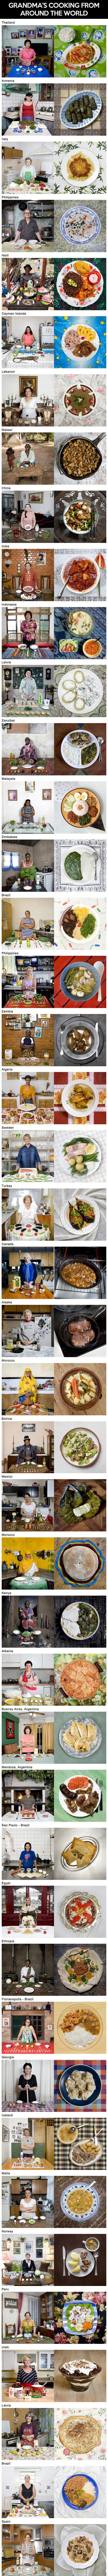 Grandma's Cooking In Different Parts Of The World